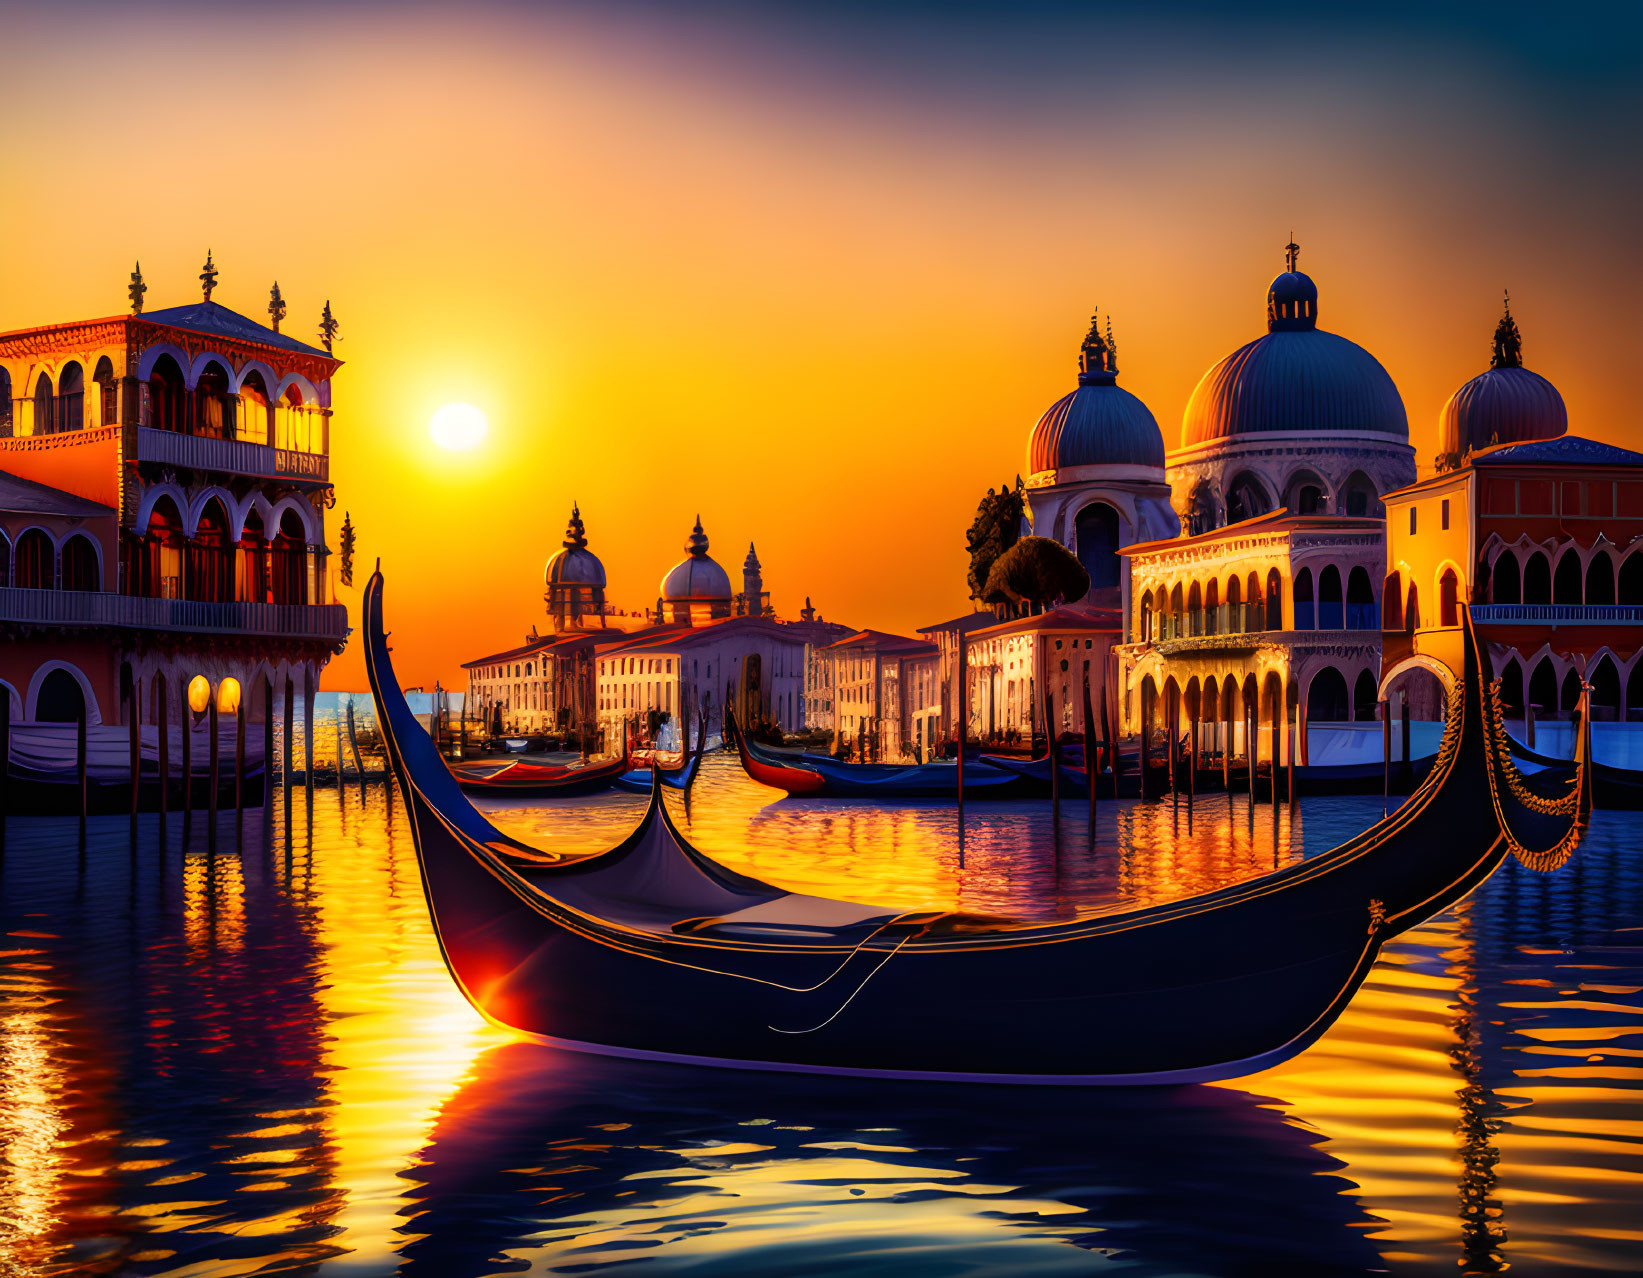 Gondola floating with Venice architecture in vibrant sunset sky